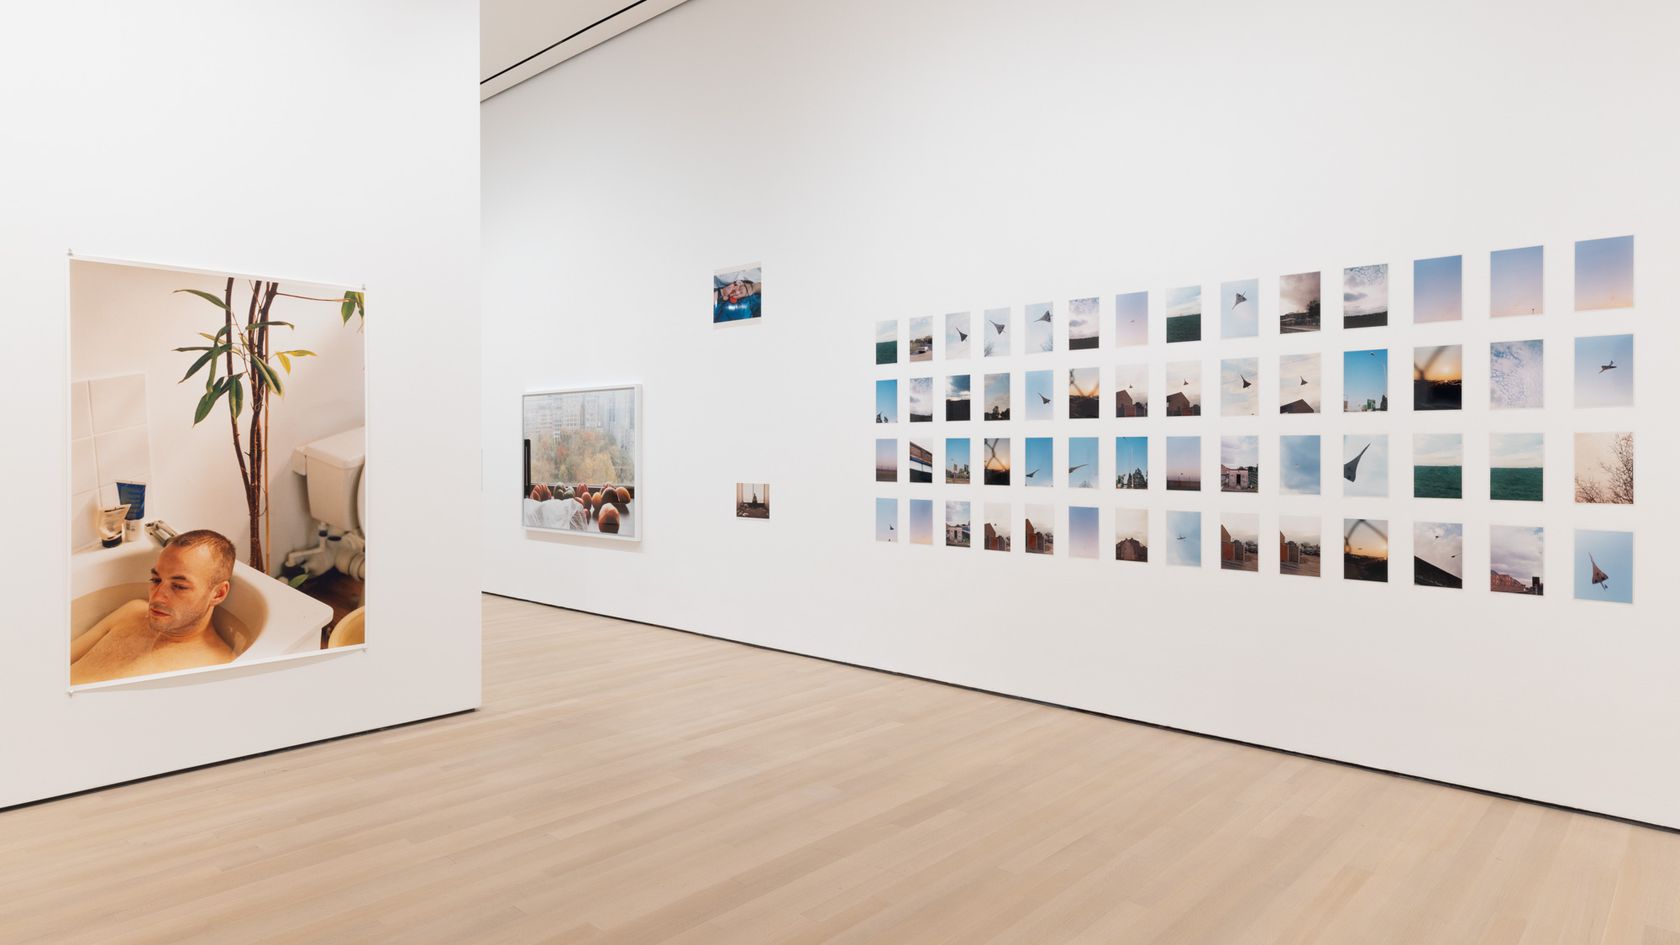 /media/uploads/news/2022/09/web/Wolfgang-Tillmans-To-look-without-fear-Installation-Image-3.jpg